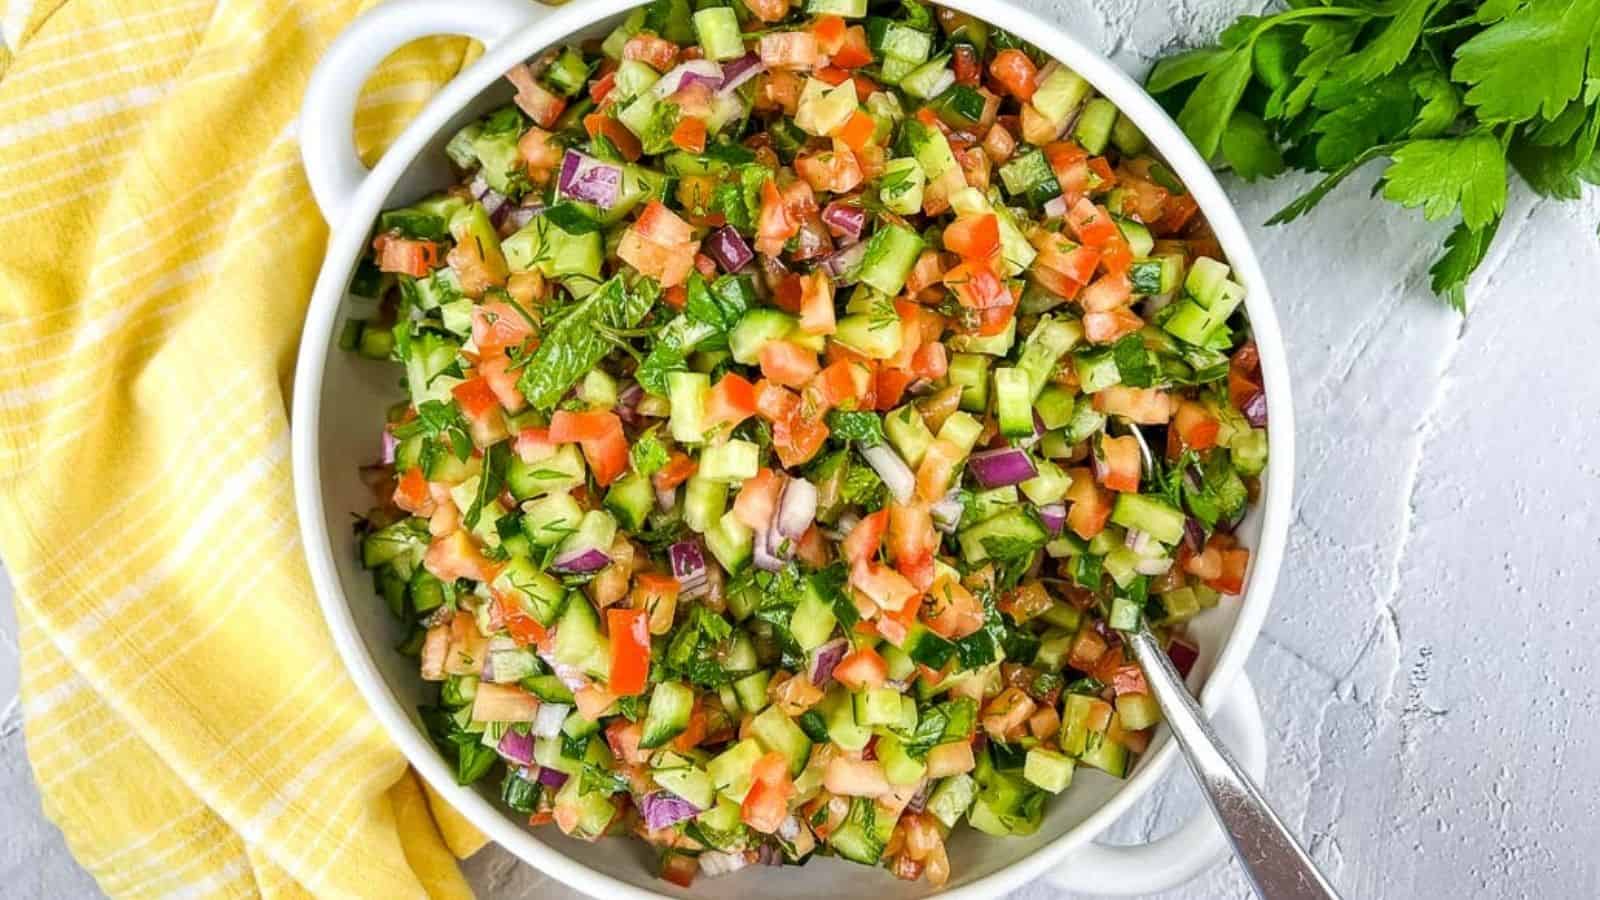 <p>Shirazi Salad is a refreshing mix of finely chopped vegetables that’s perfect for a light meal or side dish. The flavors are bright and invigorating, making it a great choice for summer. It’s simple yet incredibly tasty, with a focus on fresh ingredients. This salad is a wonderful way to enjoy a healthy, delicious meal.<br><strong>Get the Recipe: </strong><a href="https://cookwhatyoulove.com/shirazi-salad-recipe/?utm_source=msn&utm_medium=page&utm_campaign=">Shirazi Salad</a></p>